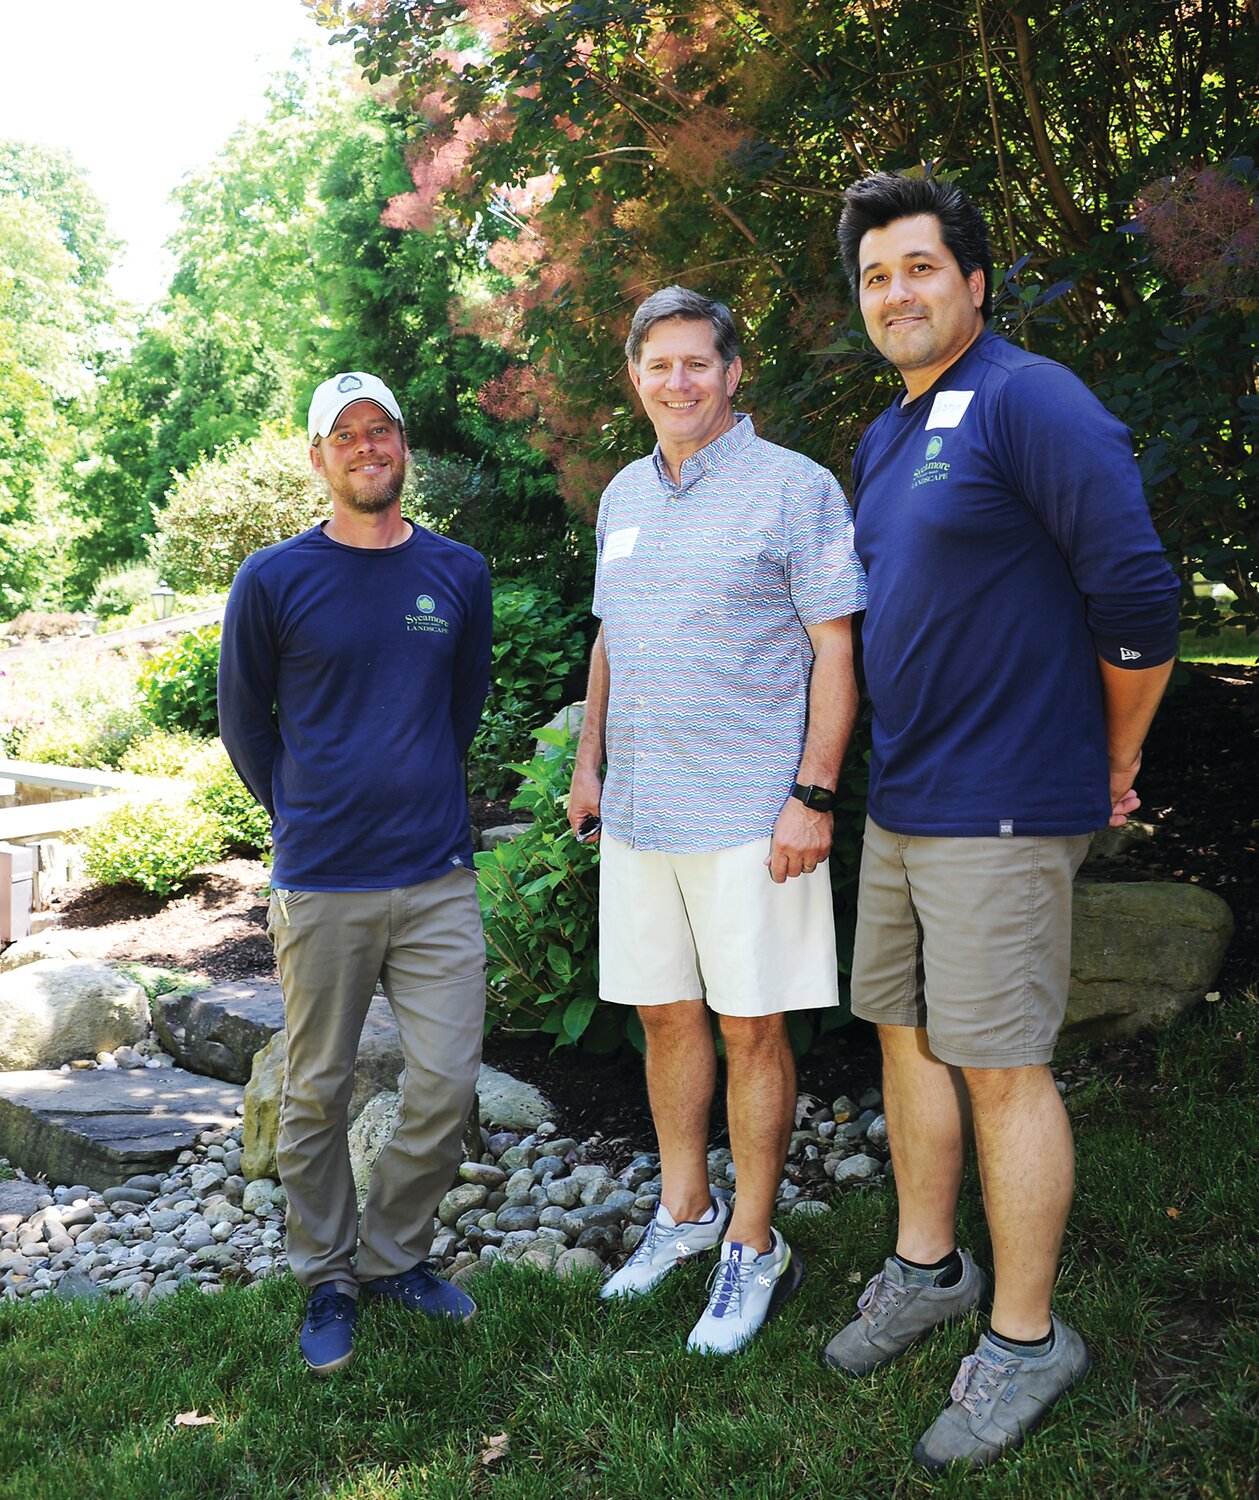 Tim Ebersole of Sycamore Landscaping, homeowner Don Barder and Justin Braley, owner of Sycamore landscaping.